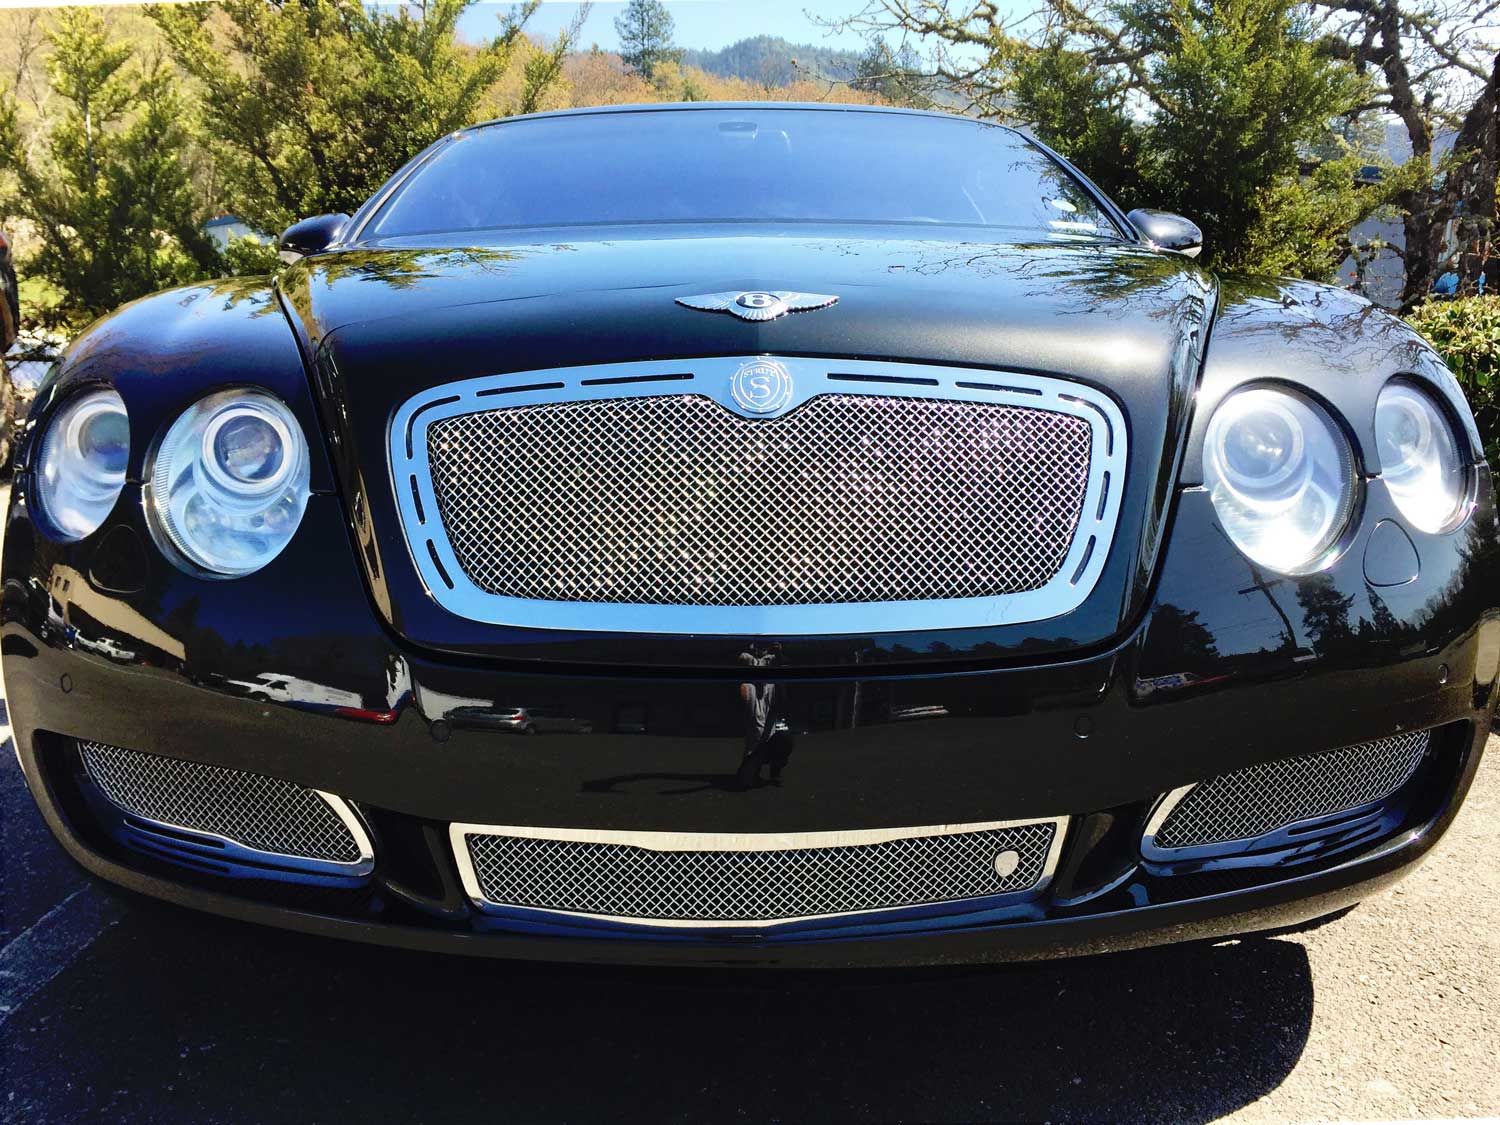 Front-view of shiny Bentley Continental GT parked at RestorFX Grants Pass center after restoration